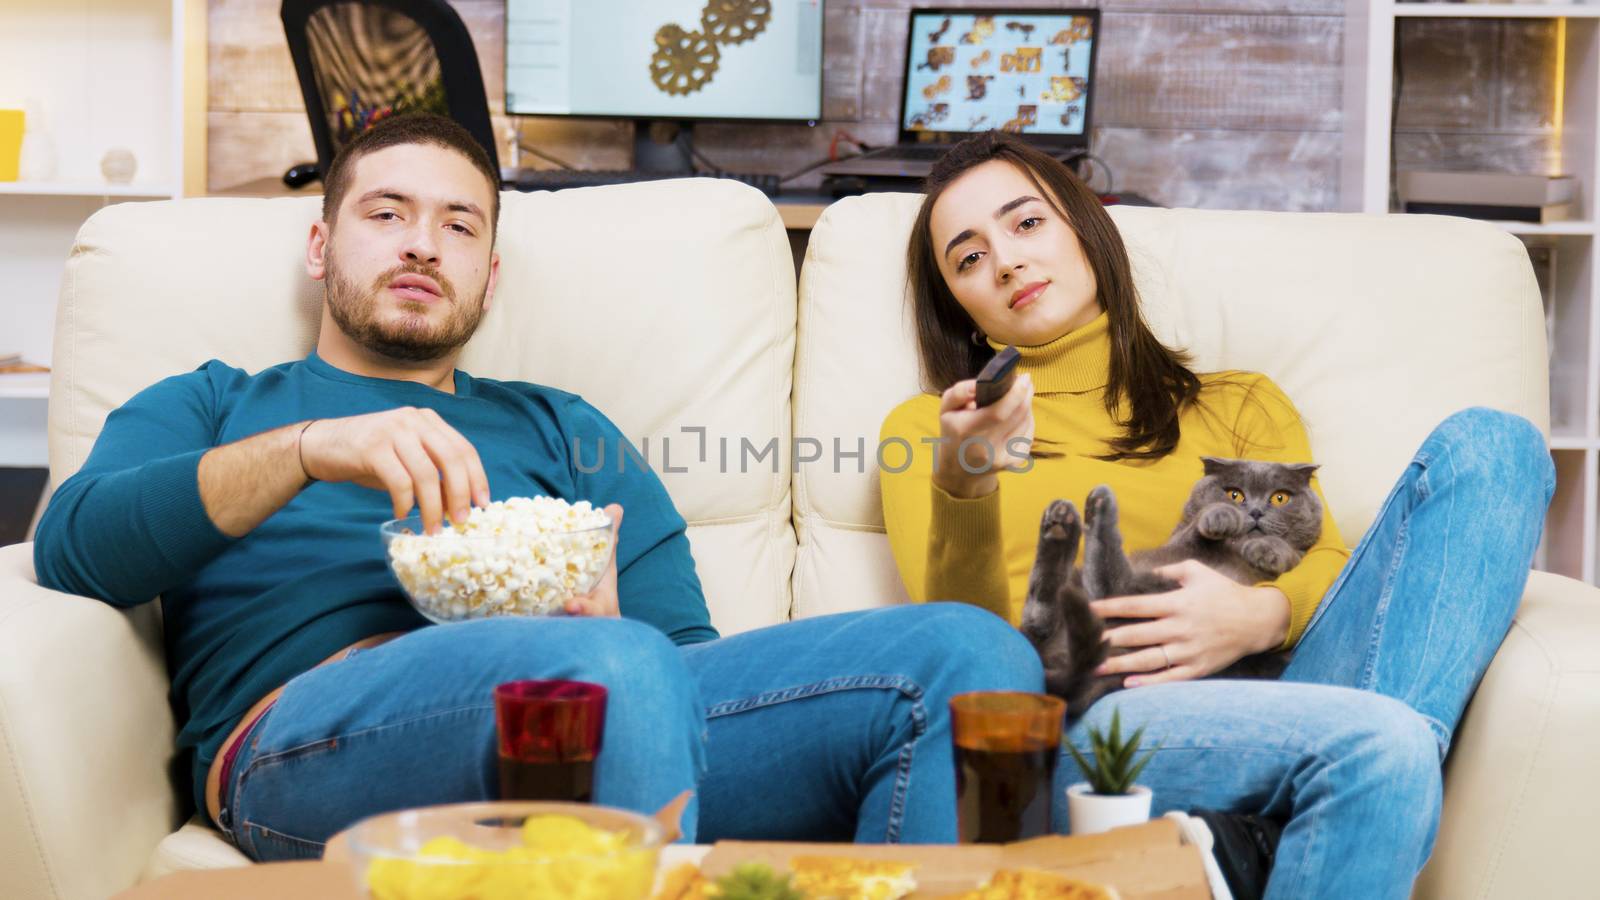 Bored girl sitting on the couch with the cat in her lap and boyfriend next to her is using tv remote control.